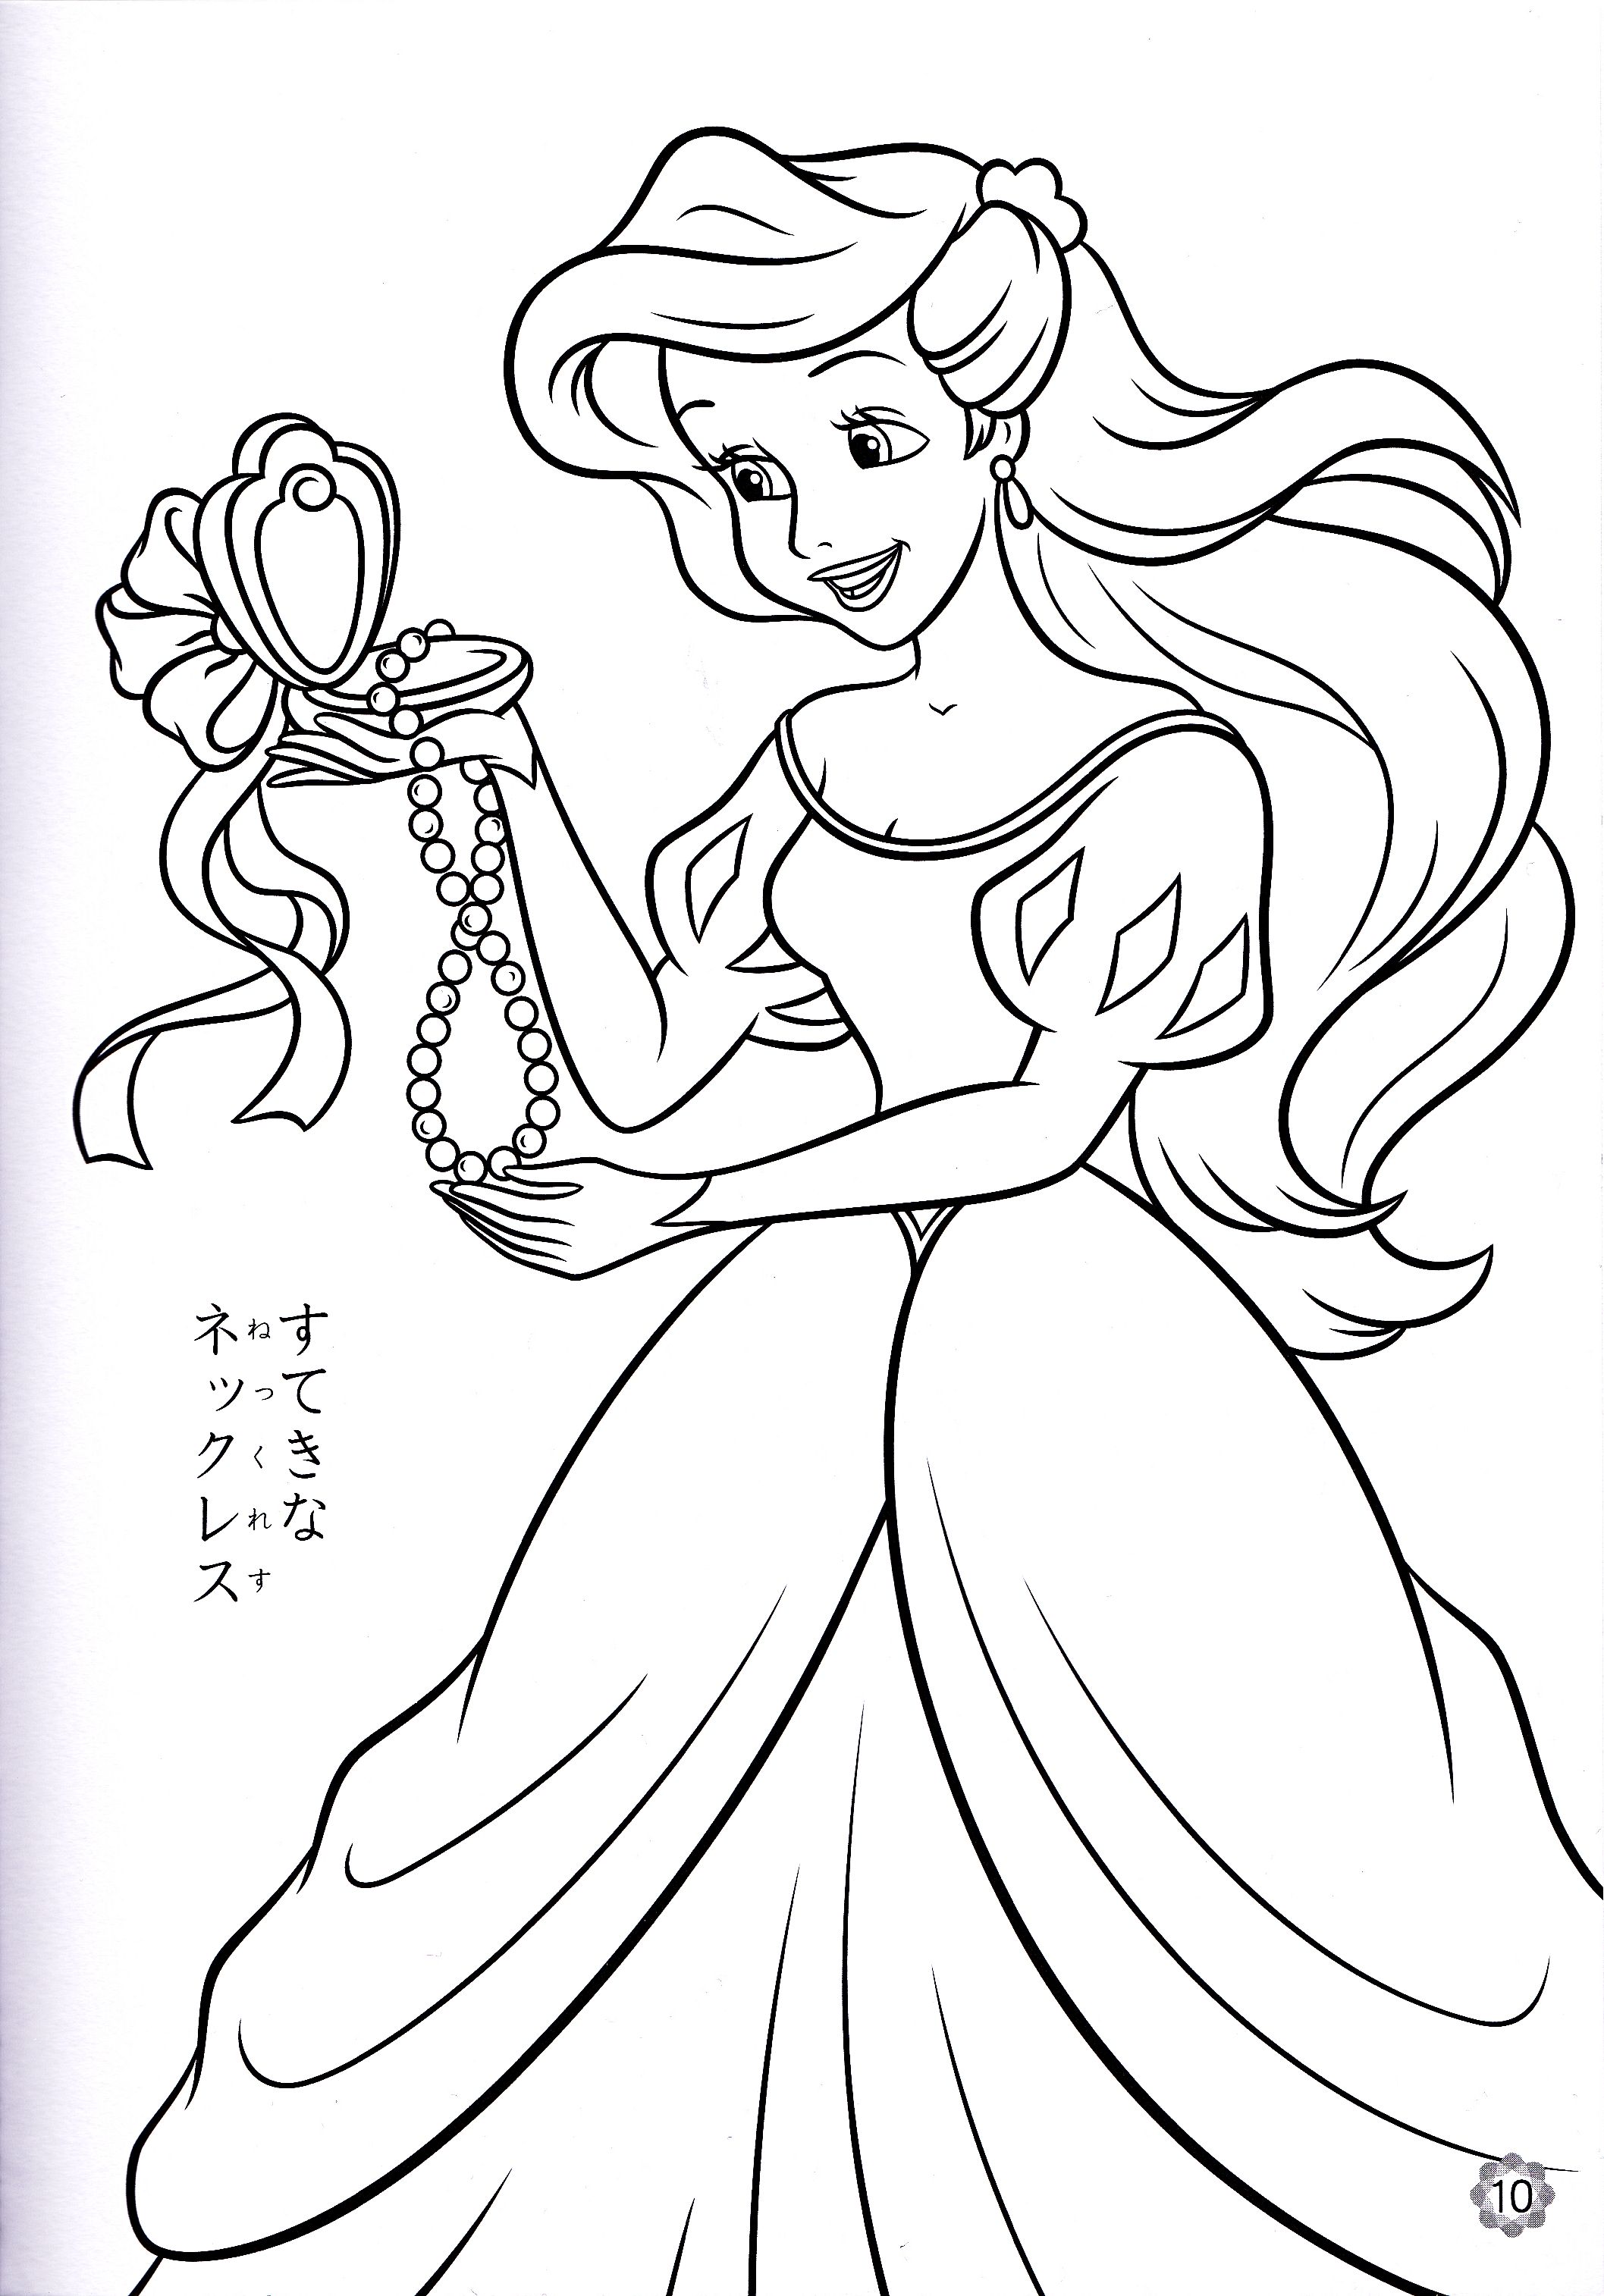 Coloring | Coloring pages, Disney ...